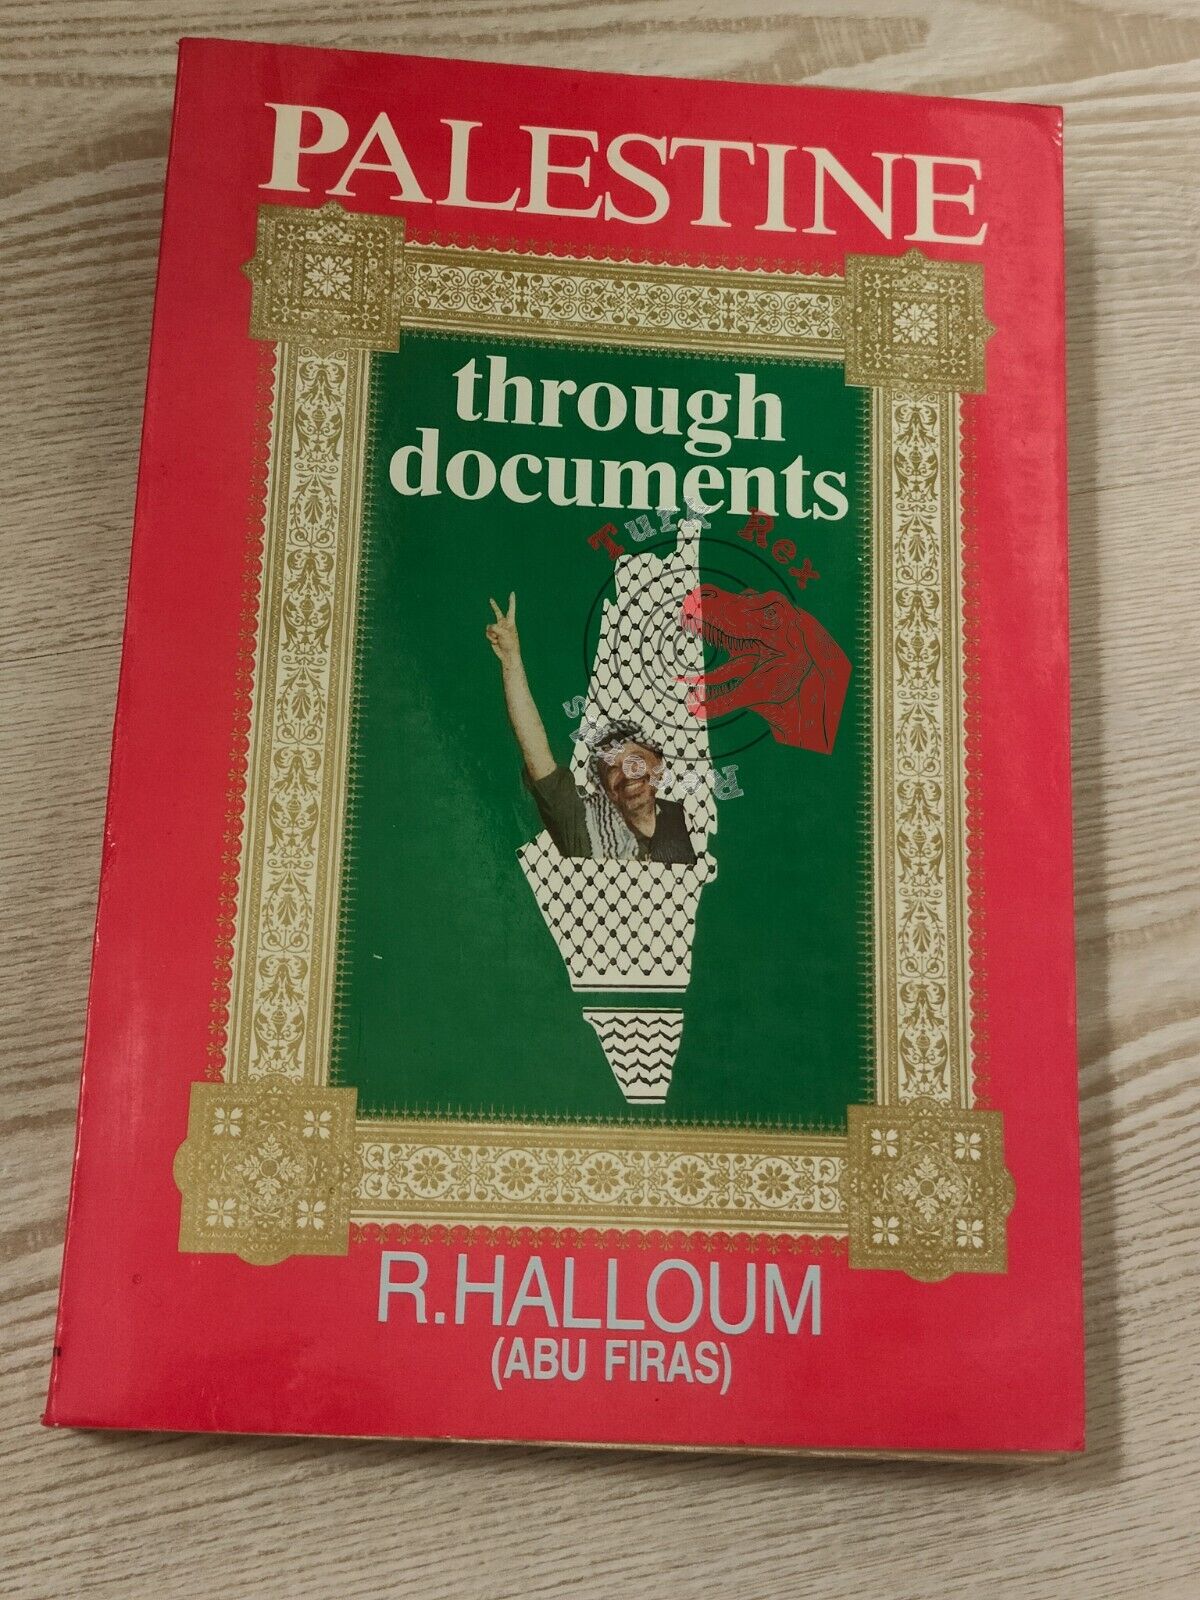 PALESTINE THROUGH DOCUMENTS - R. HALLOUM BOOK with many MAPS PHOTOS MIDDLE EAST